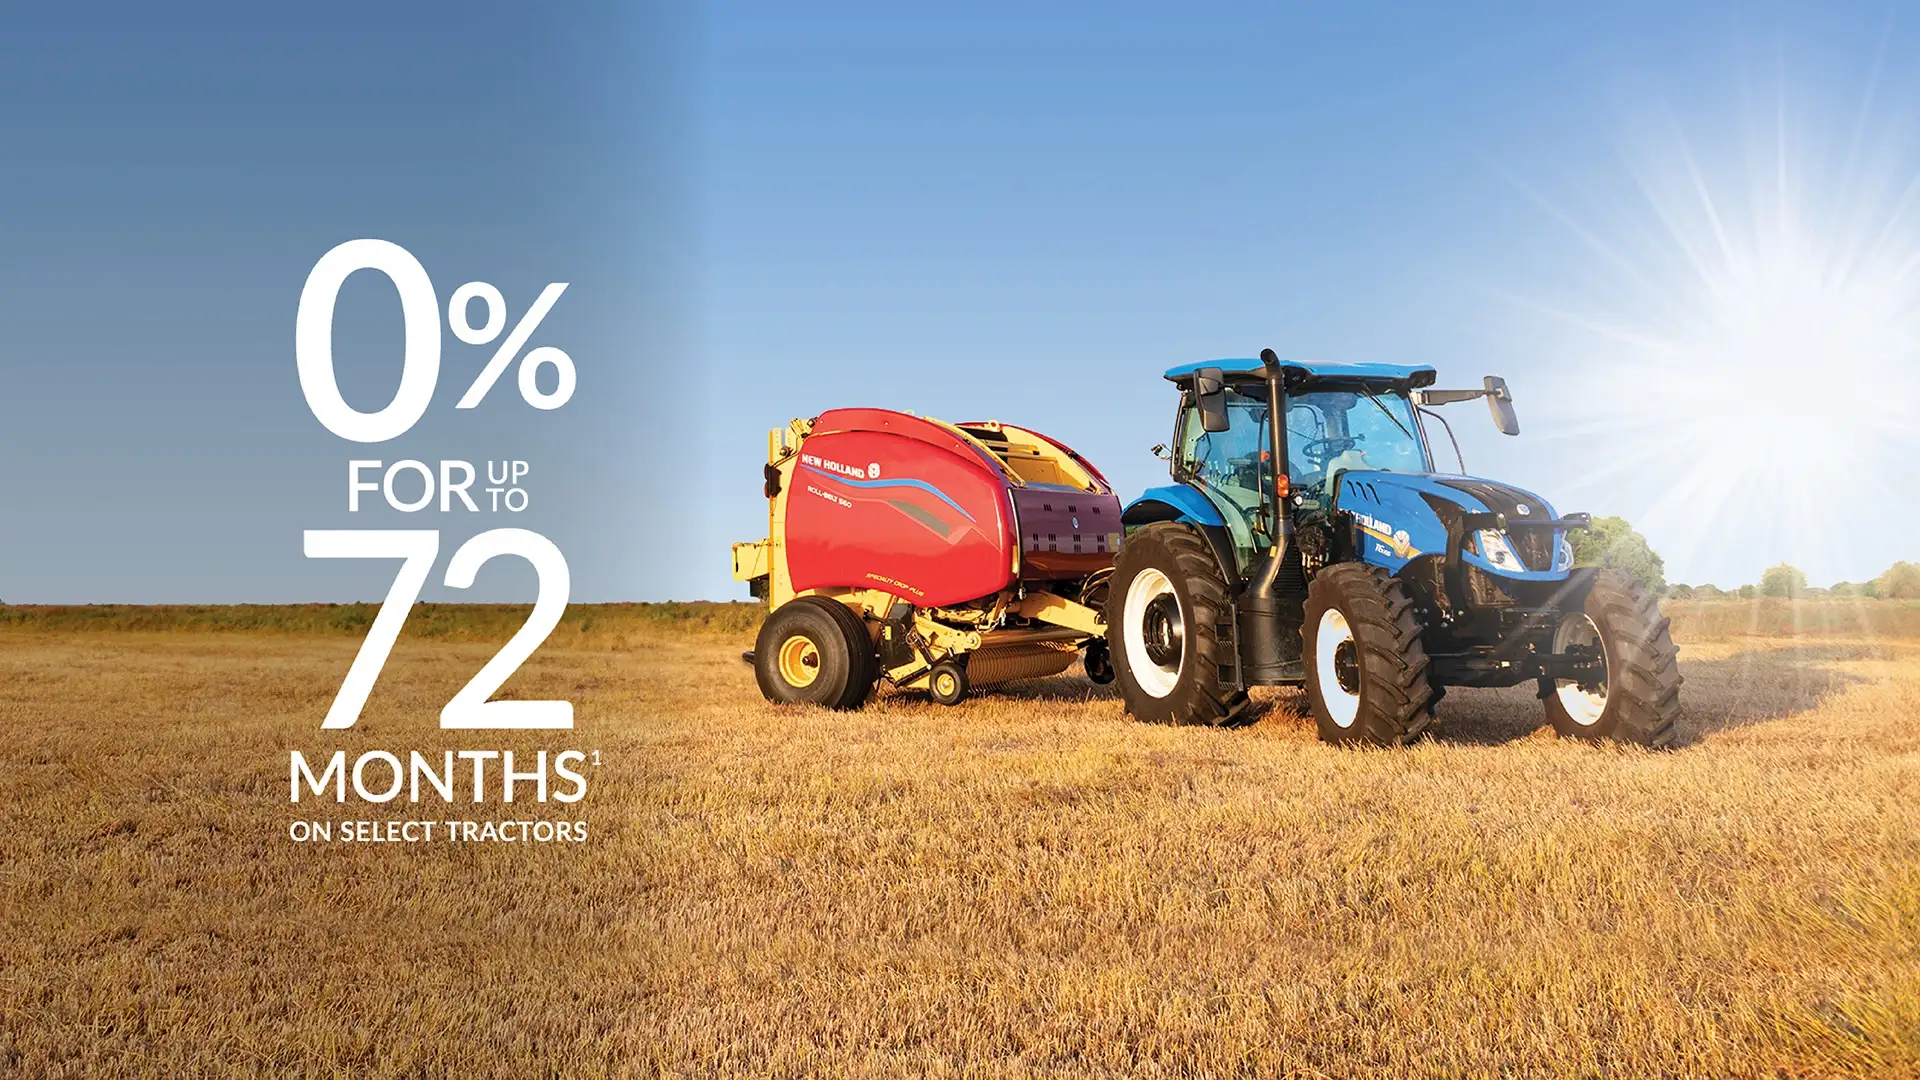 Offers on New Holland Equipment